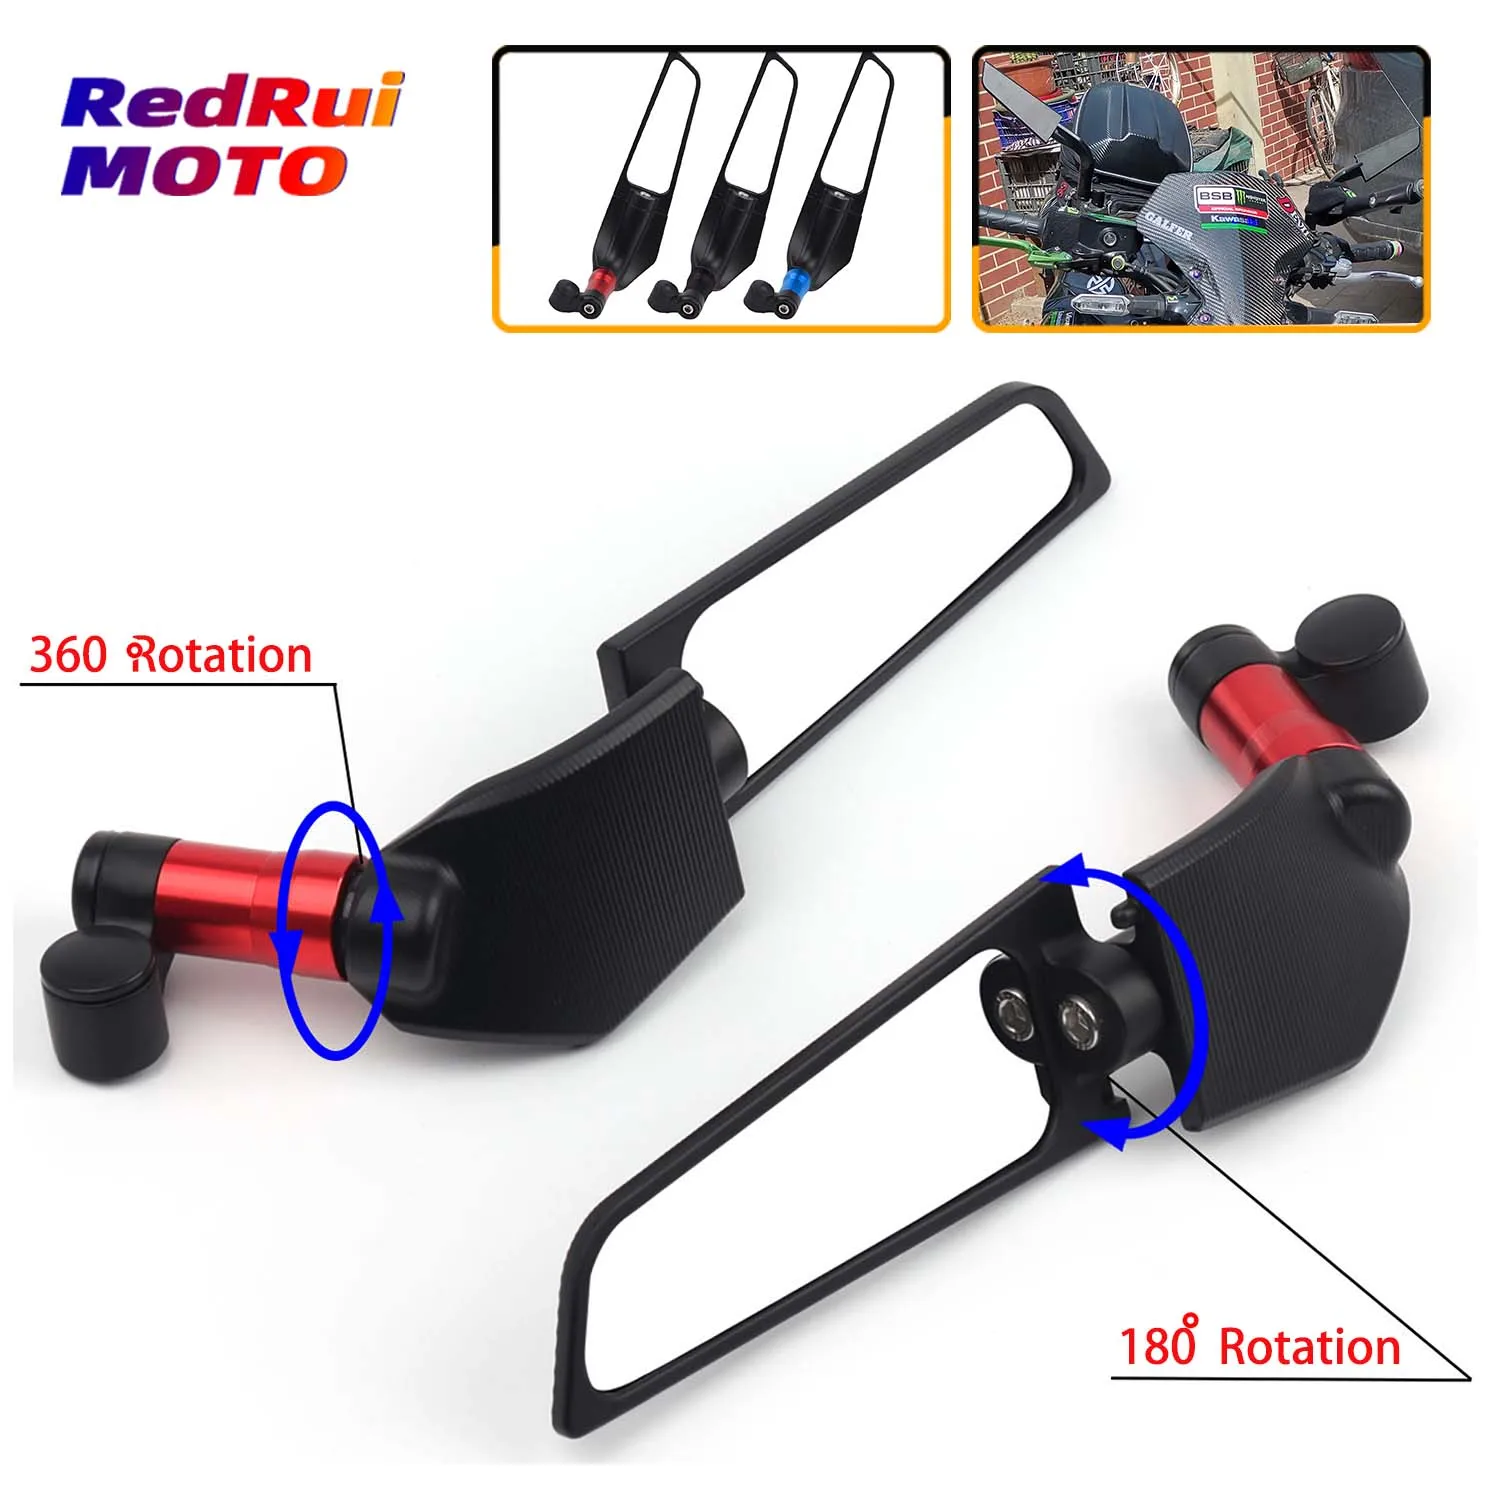 

Universal New fixed wind wing for Benelli TNT 135 25 R160 899 SPORT EVO 1130K 125 TRK 502 motorcycle Rotating rearview mirror